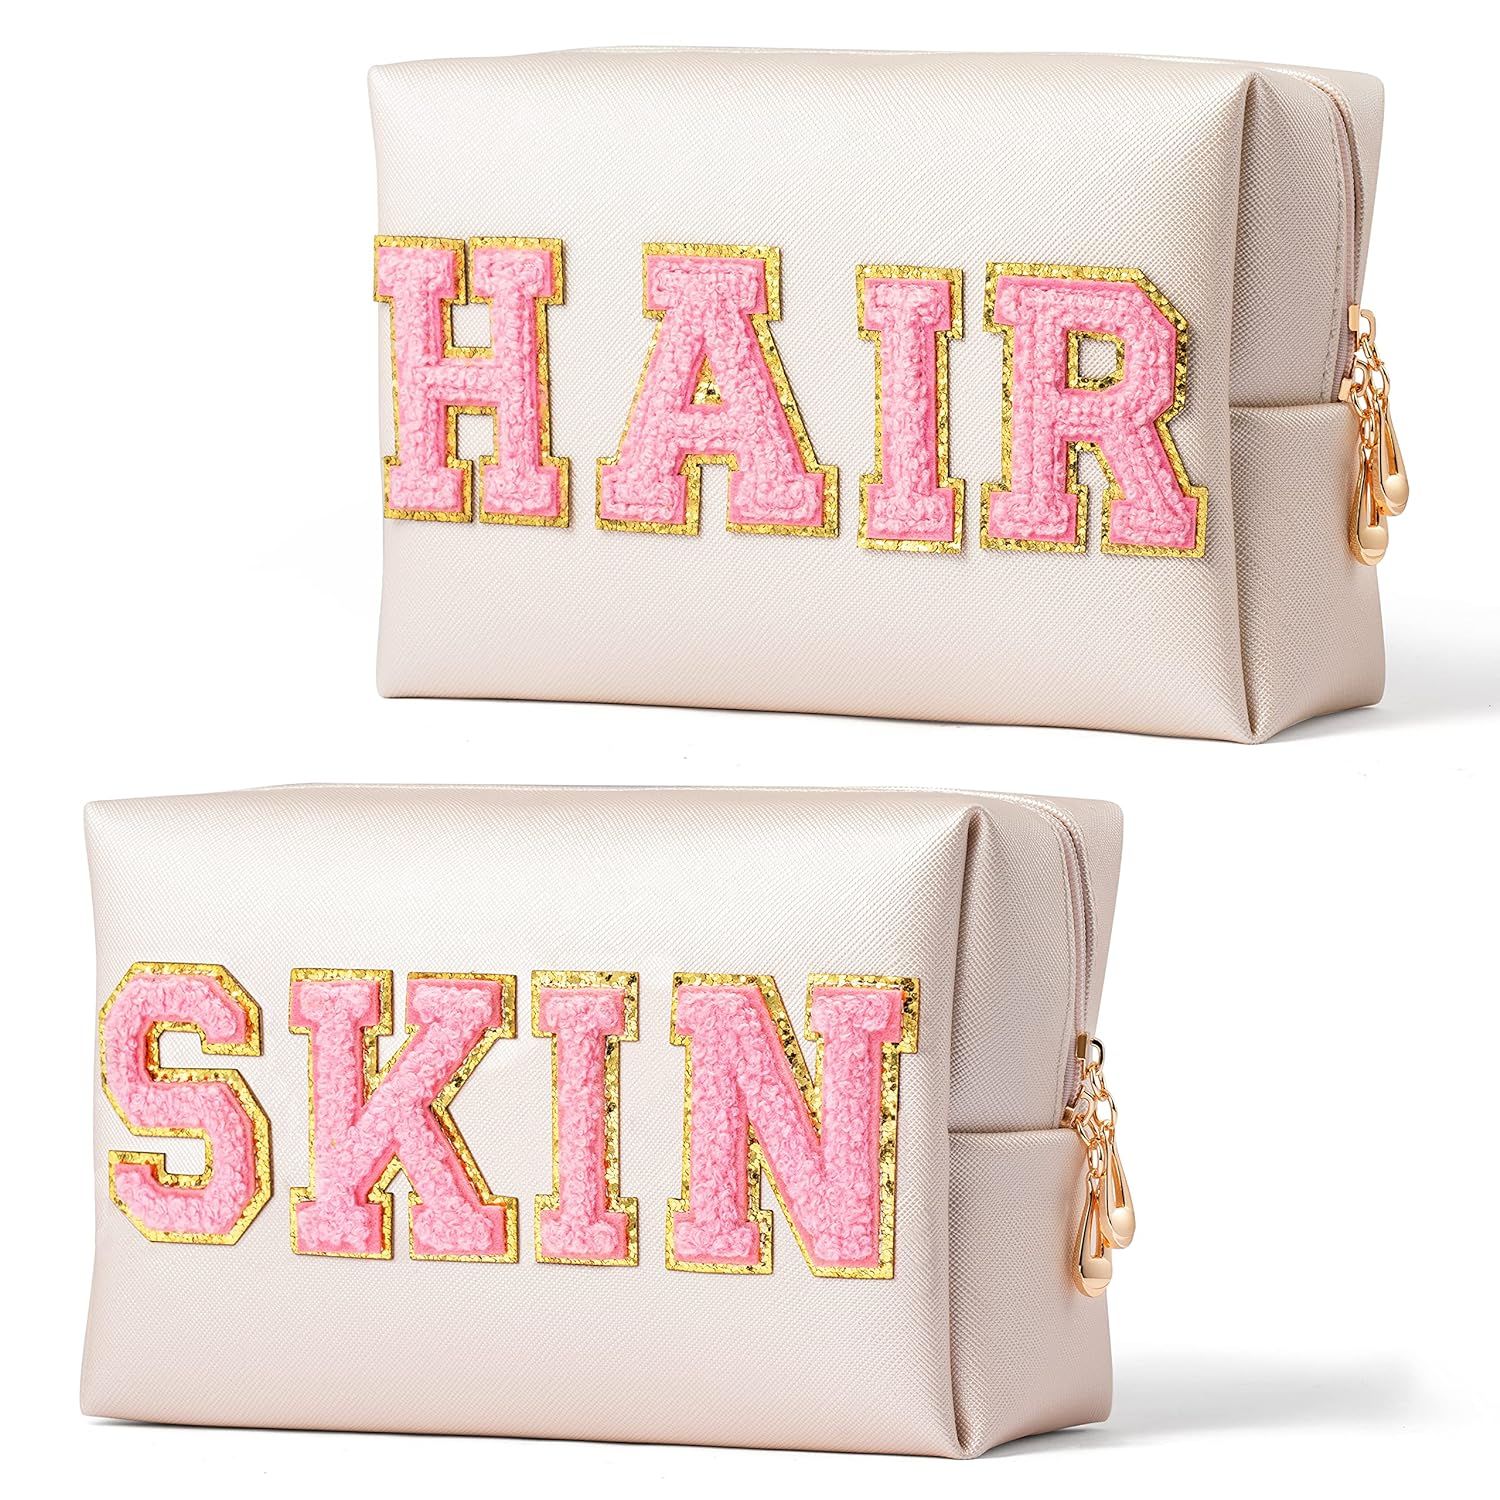 Y1tvei 2Pcs Preppy Patch SKIN HAIR Varsity Letter Cosmetic Toiletry Bag Pink Letter Makeup Bag Zi... | Amazon (US)